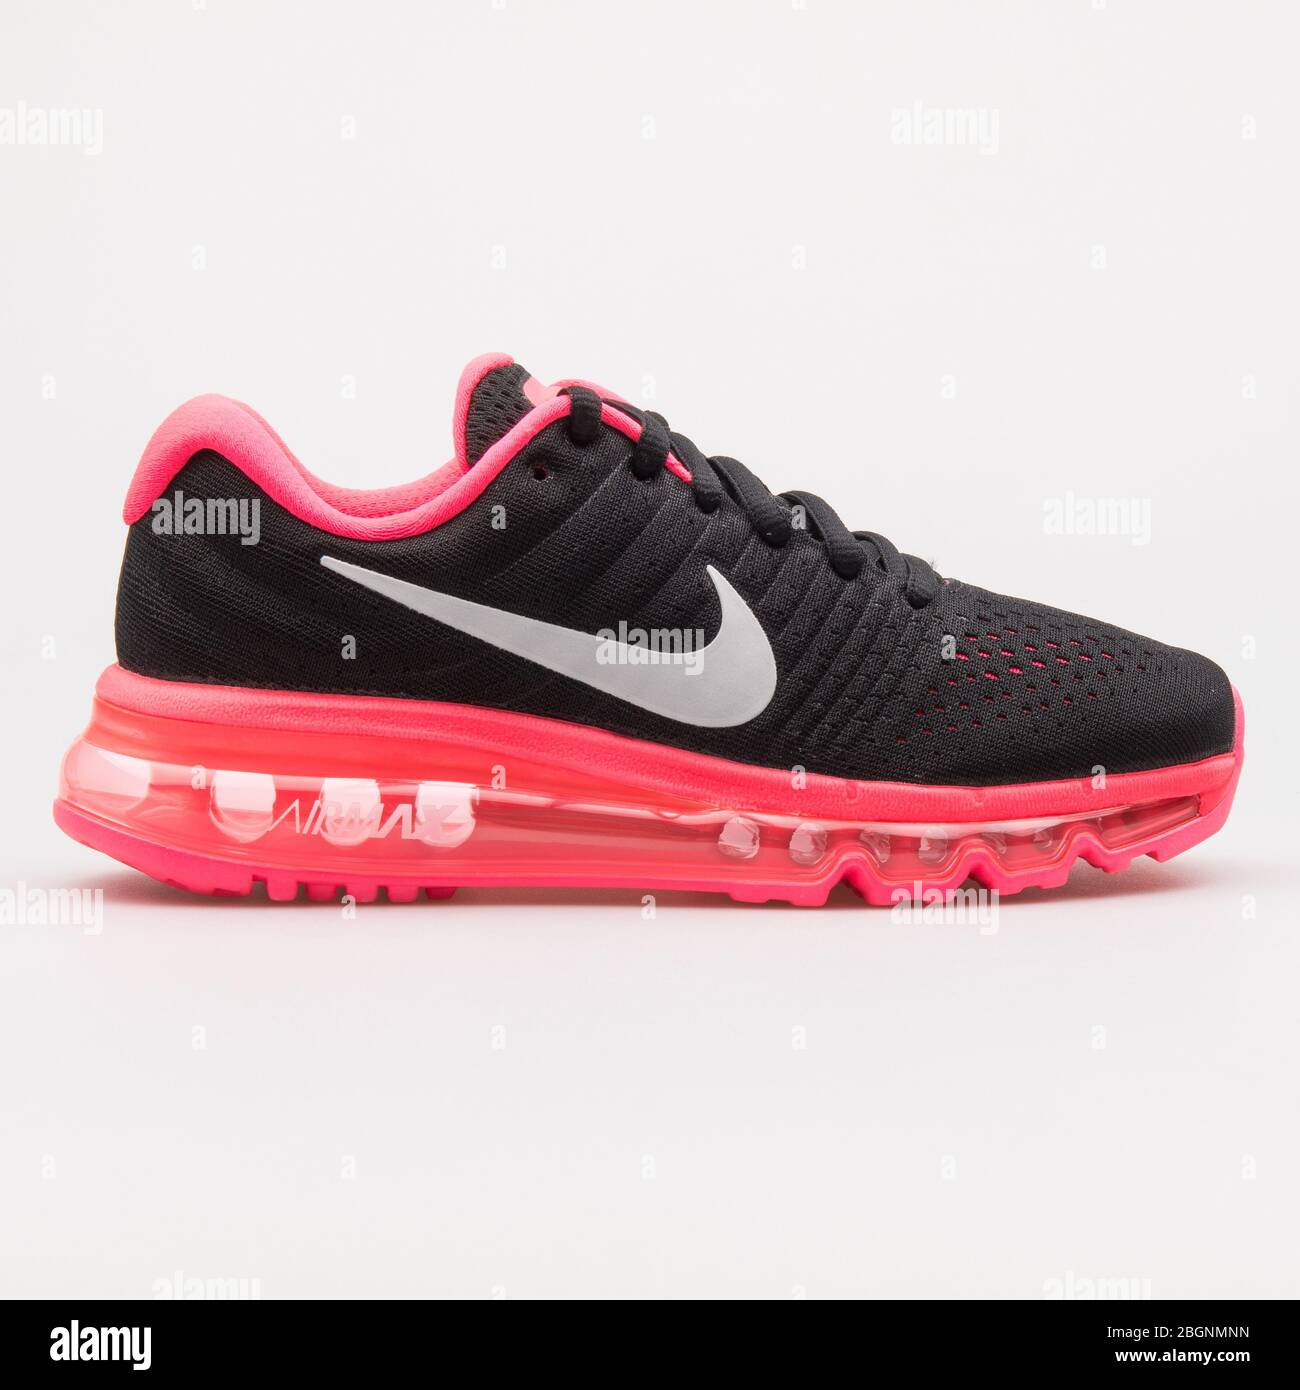 VIENNA, AUSTRIA - AUGUST 14, 2017: Nike Air Max 2017 black and pink sneaker  on white background Stock Photo - Alamy